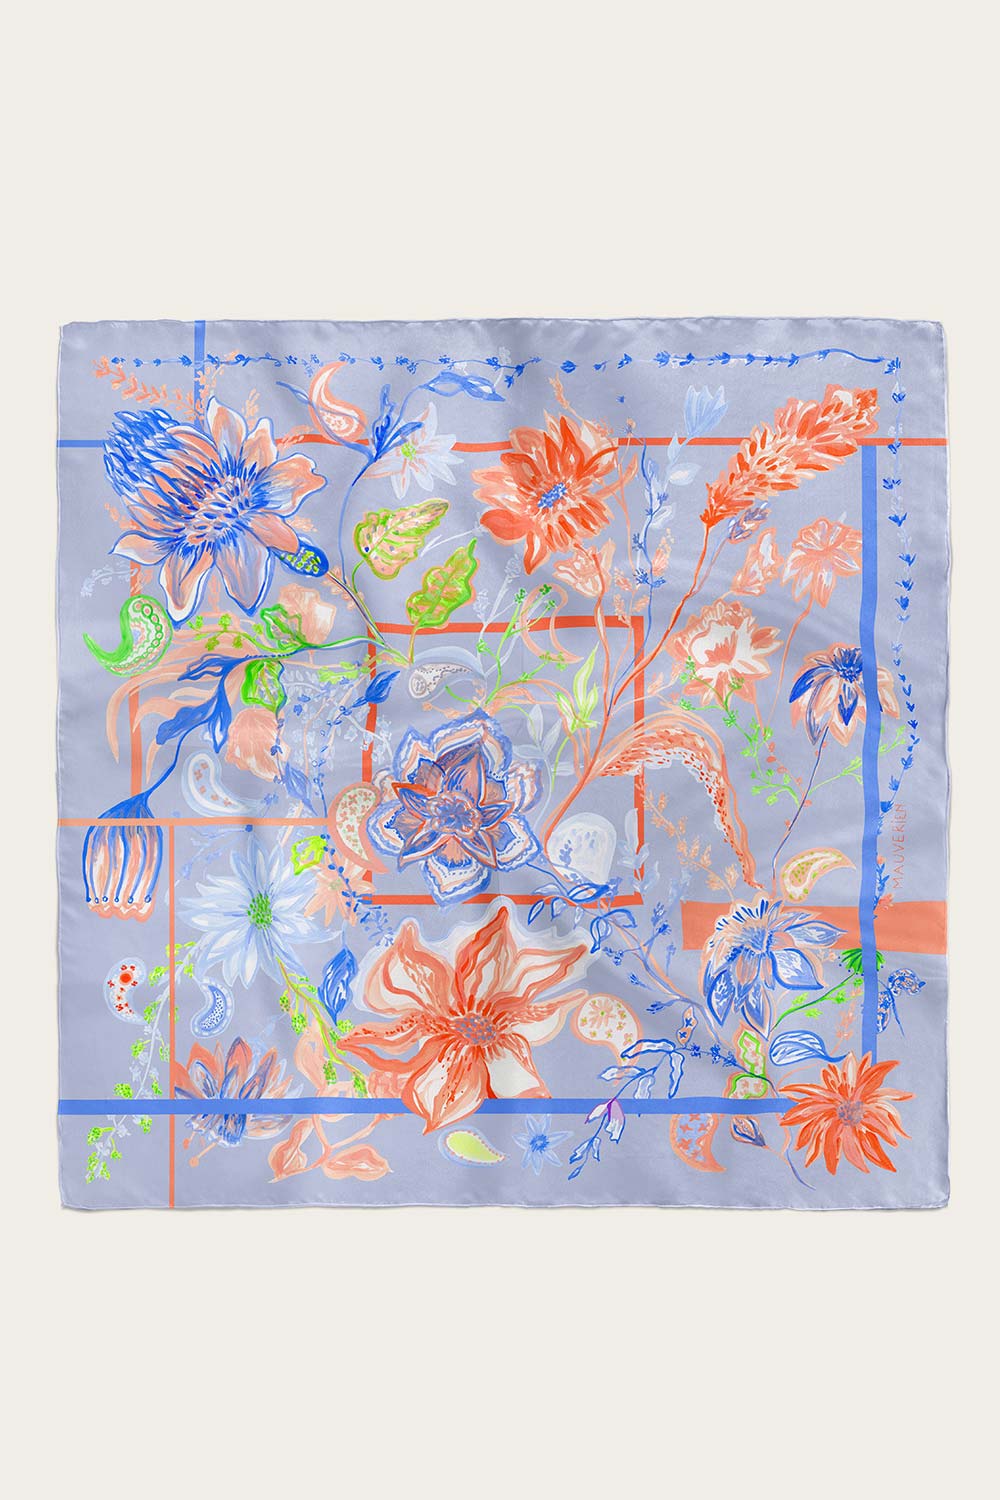 Silk scarf with orange and green flowers on blue background by Mauverien.